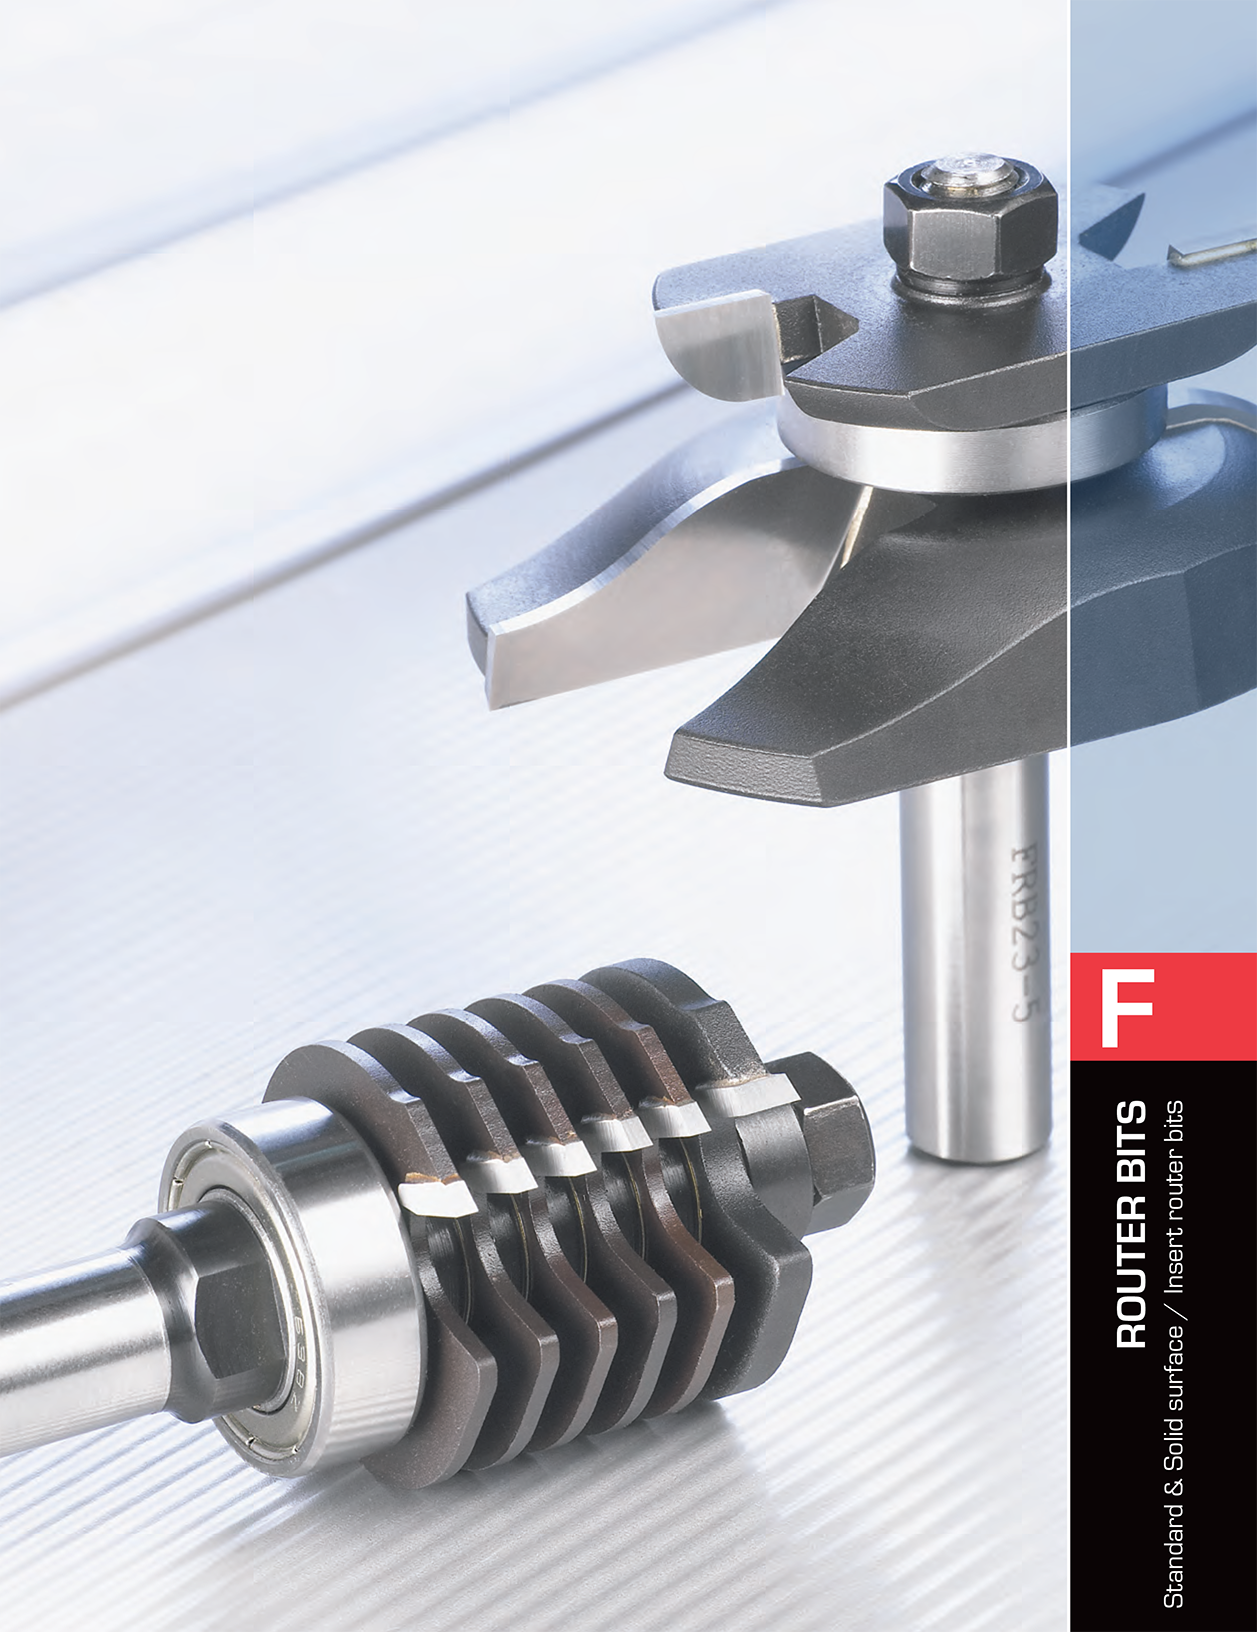 Carbide Tipped Router Bits catalogue section